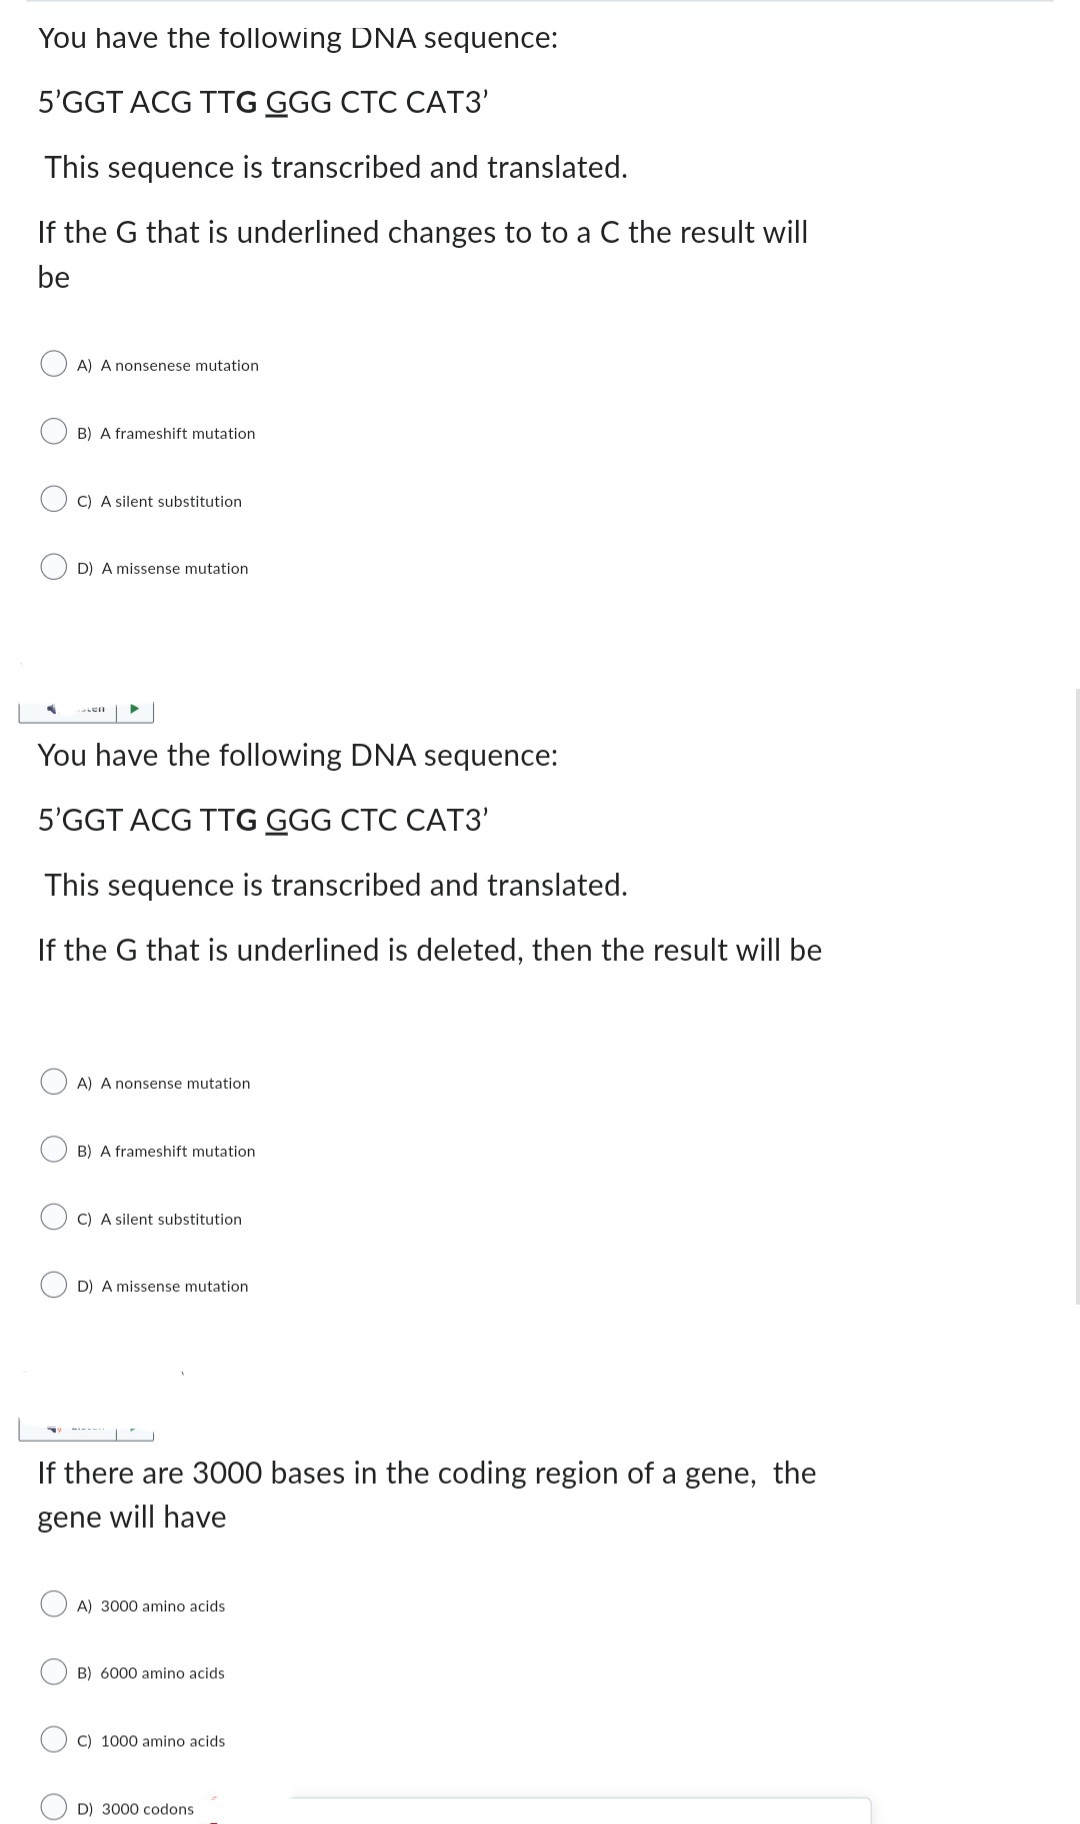 You have the following DNA sequence:
5'GGT ACG TTG GGG CTC CAT3'
This sequence is transcribed and translated.
If the G that is underlined changes to to a C the result will
be
-
A) A nonsenese mutation
B) A frameshift mutation
C) A silent substitution
D) A missense mutation
You have the following DNA sequence:
5'GGT ACG TTG GGG CTC CAT3'
This sequence is transcribed and translated.
If the G that is underlined is deleted, then the result will be
A) A nonsense mutation
B) A frameshift mutation
C) A silent substitution
D) A missense mutatio
If there are 3000 bases in the coding region of a gene, the
gene will have
A) 3000 amino acids
B) 6000 amino acids
C) 1000 amino acids
D) 3000 codons